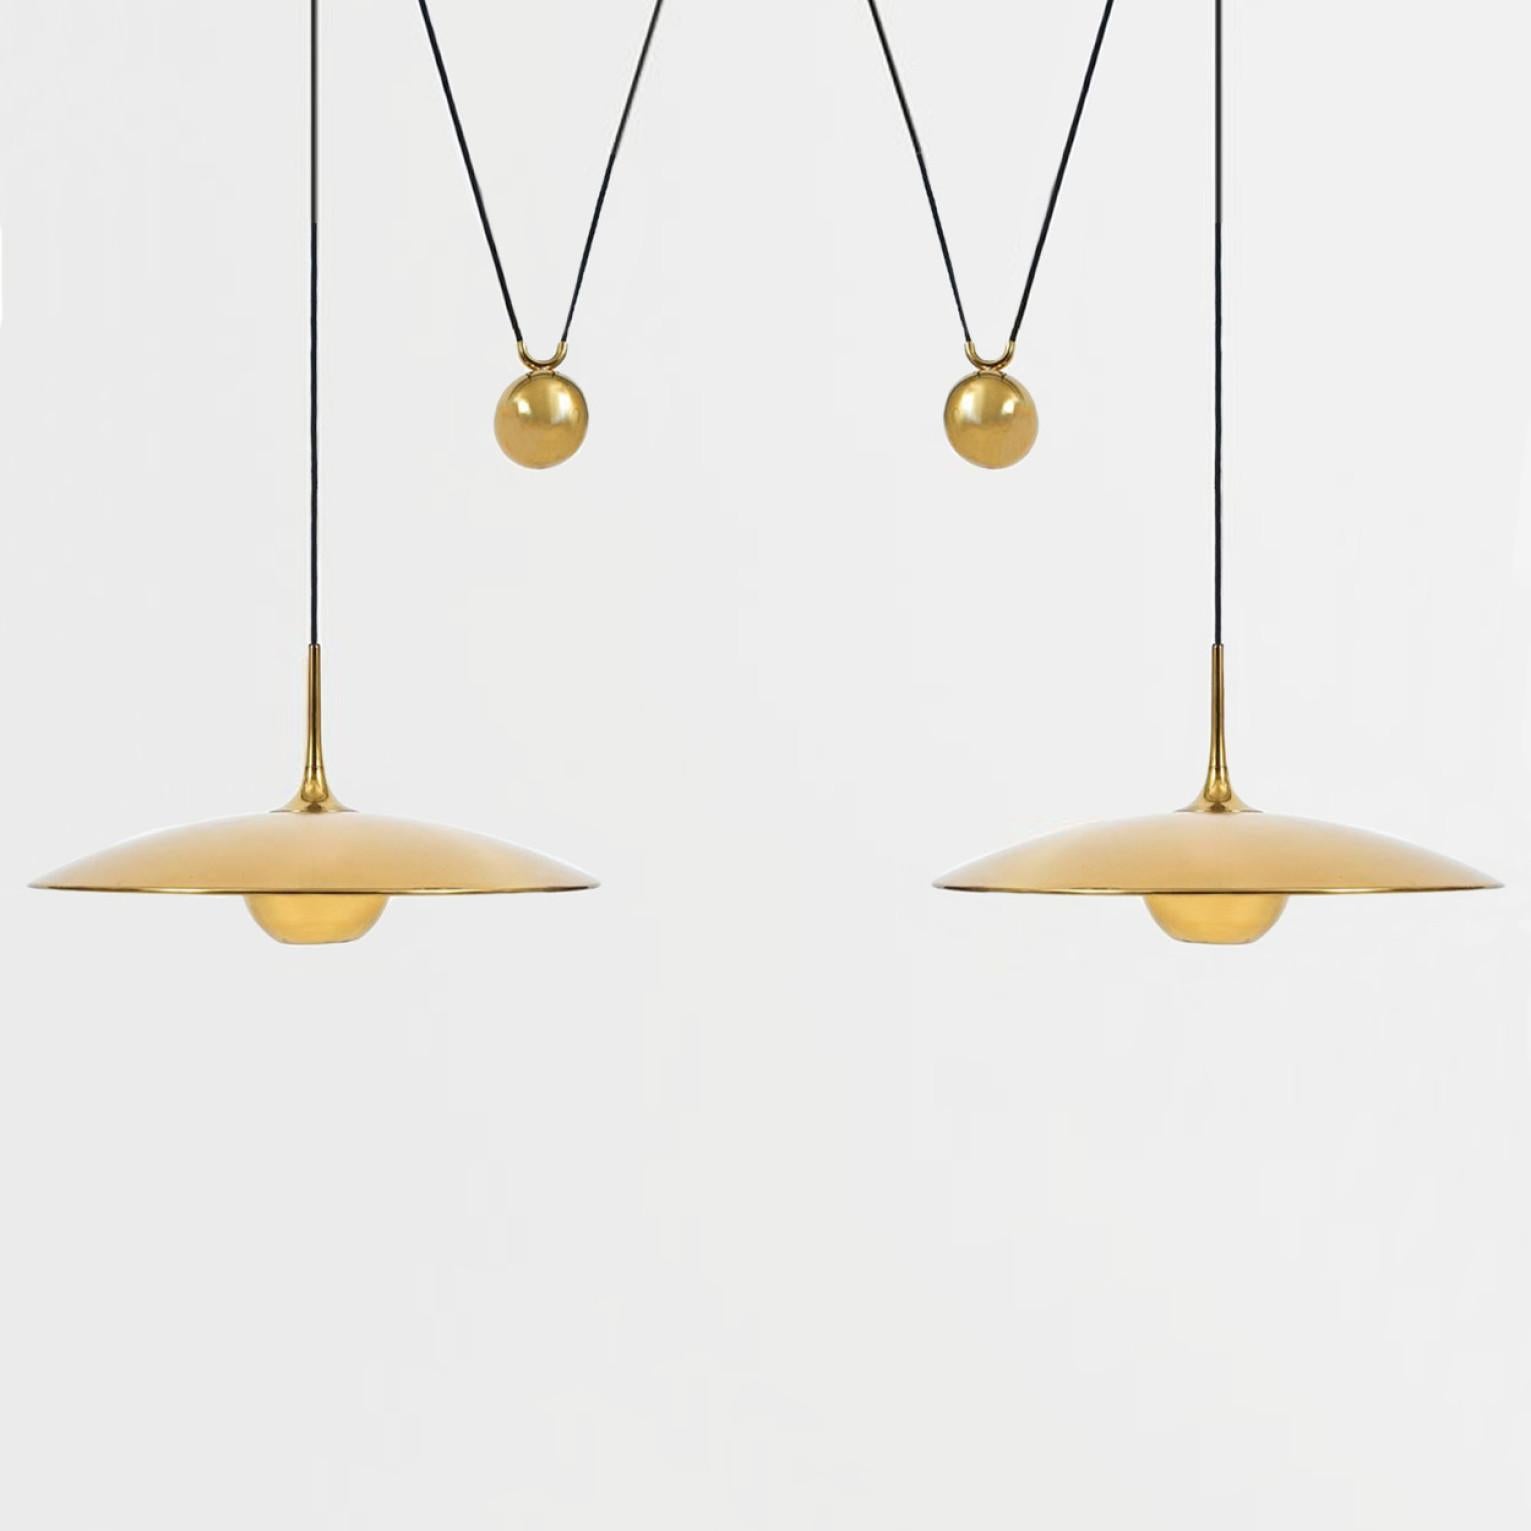 Polished Onos 55 Double Pull Brass Pendant Lamp by Florian Schulz, Germany